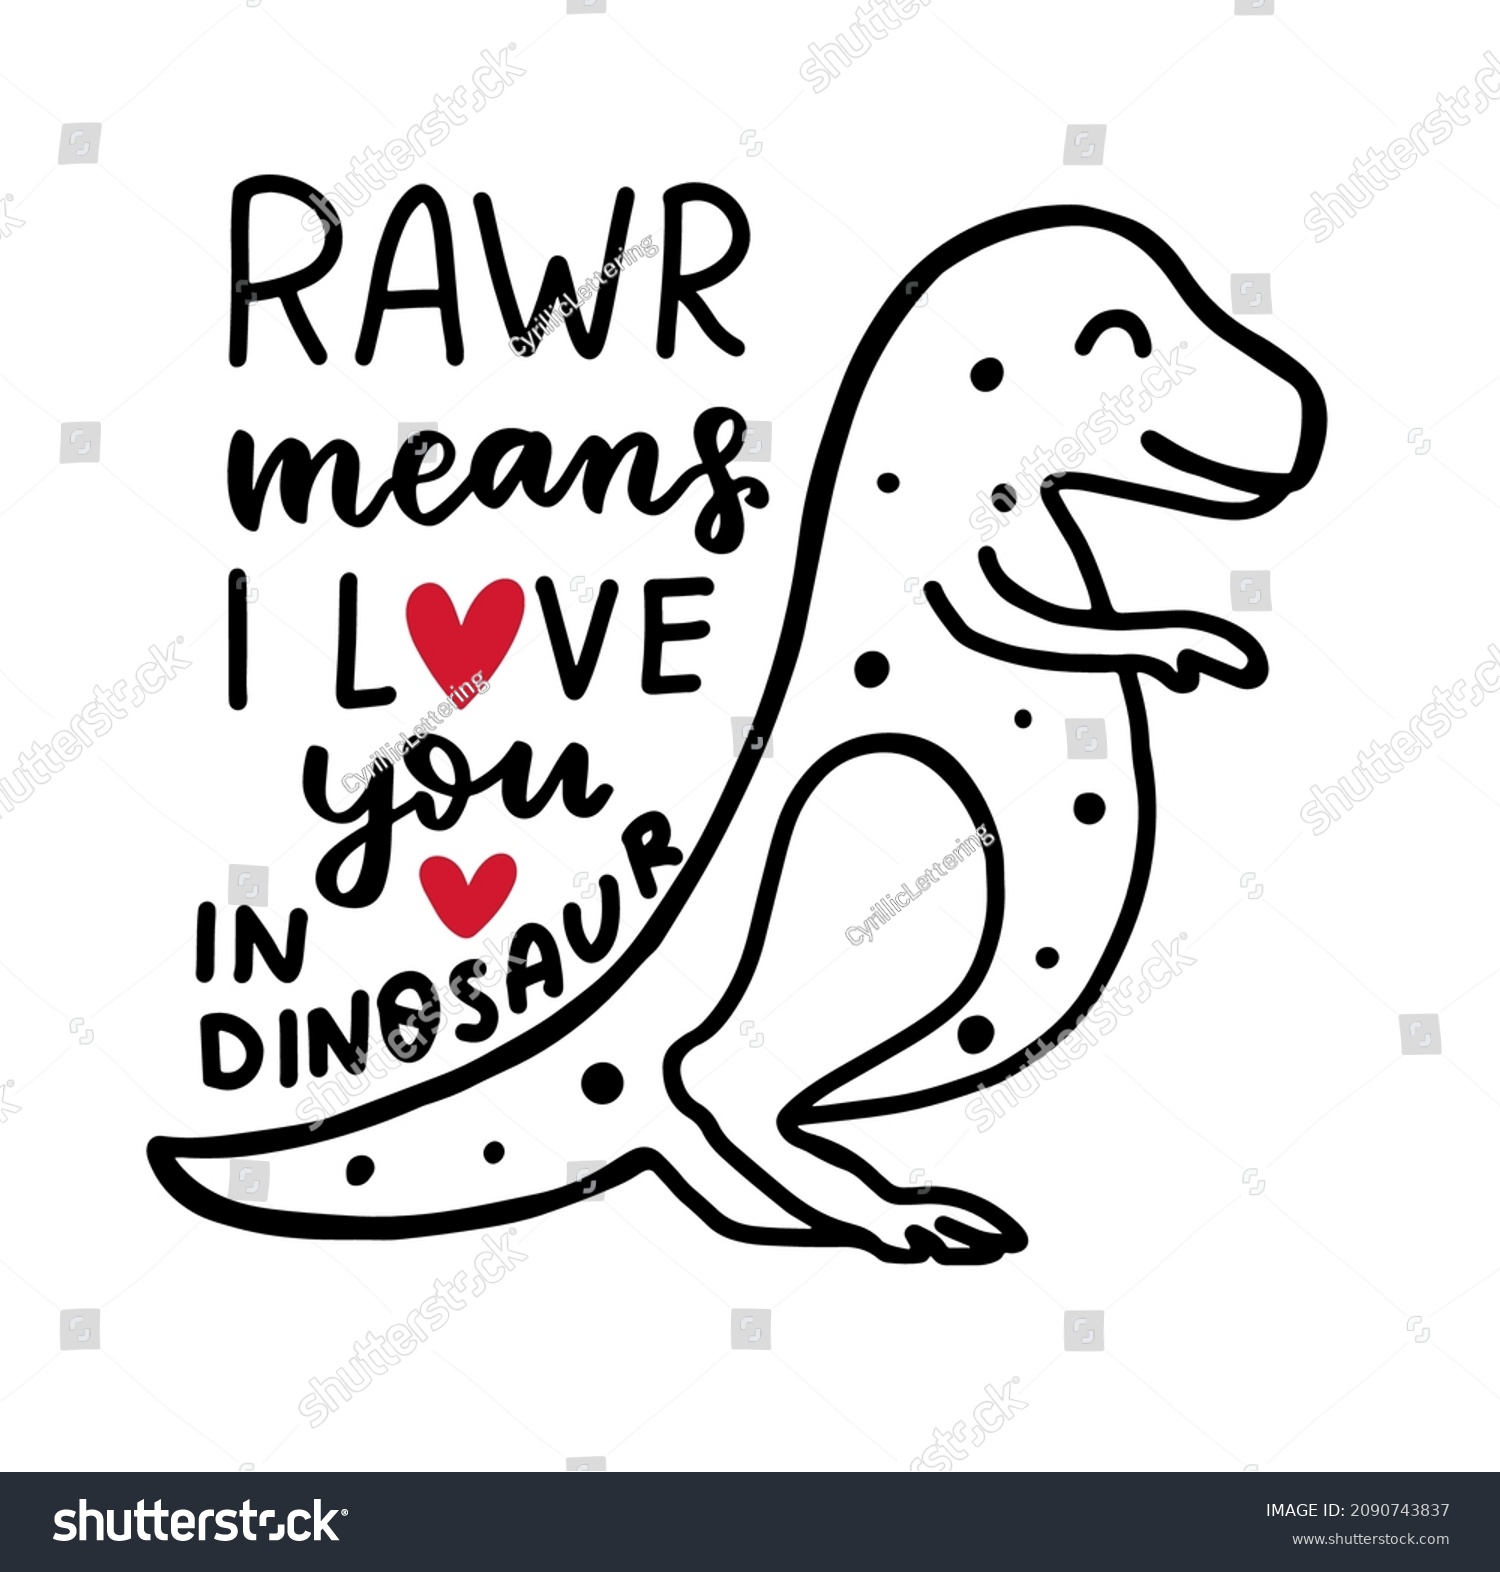 SVG of Rawr means I love you in dinosaur. T-rex dino love. Kids valentines day concept design. Hand lettering love quote. svg